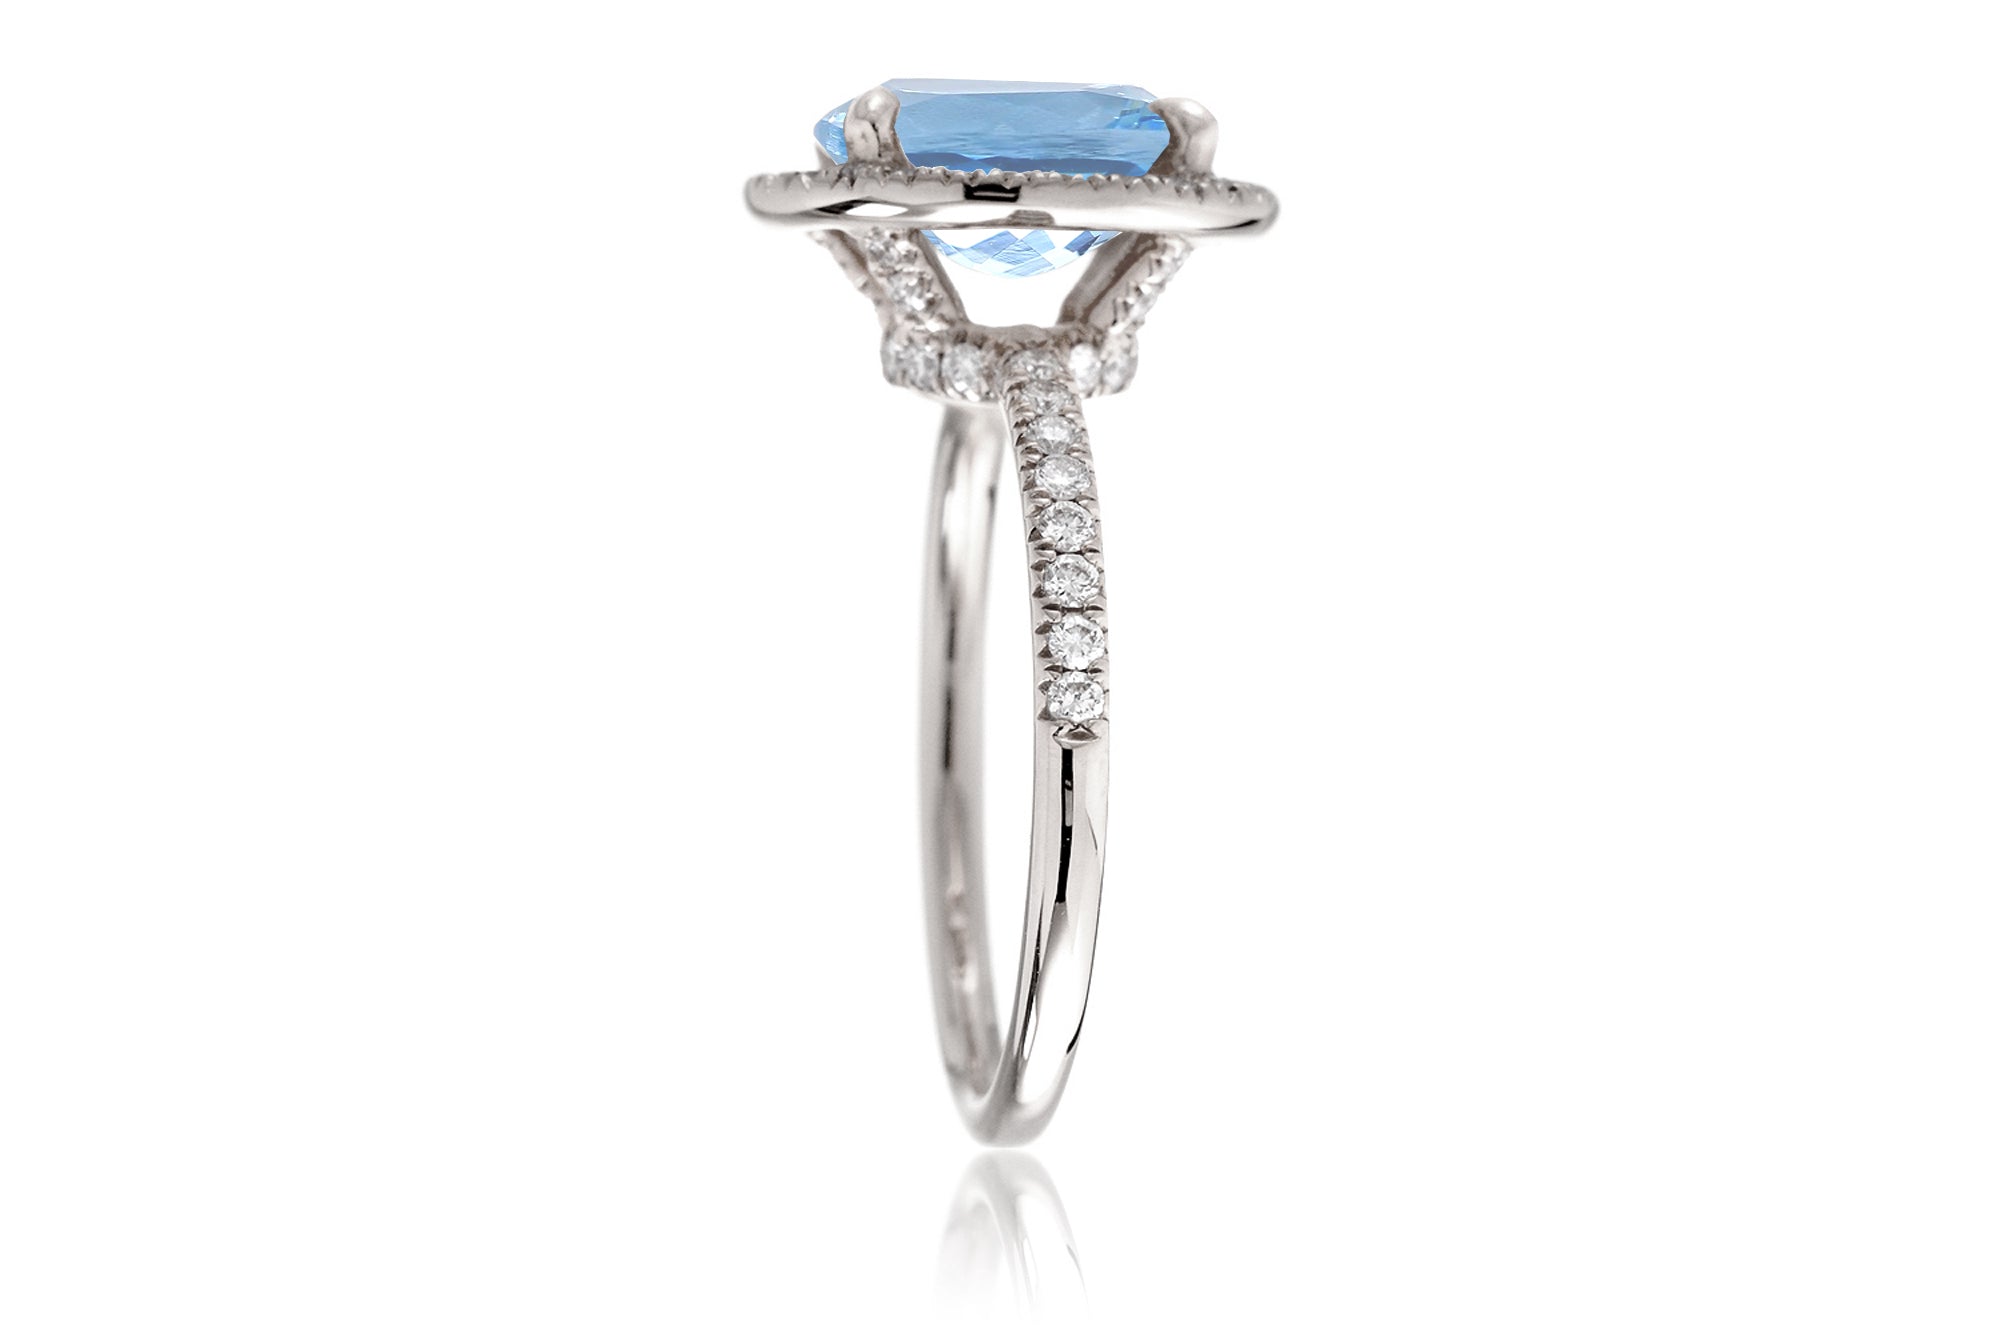 The Drenched Oval Aquamarine